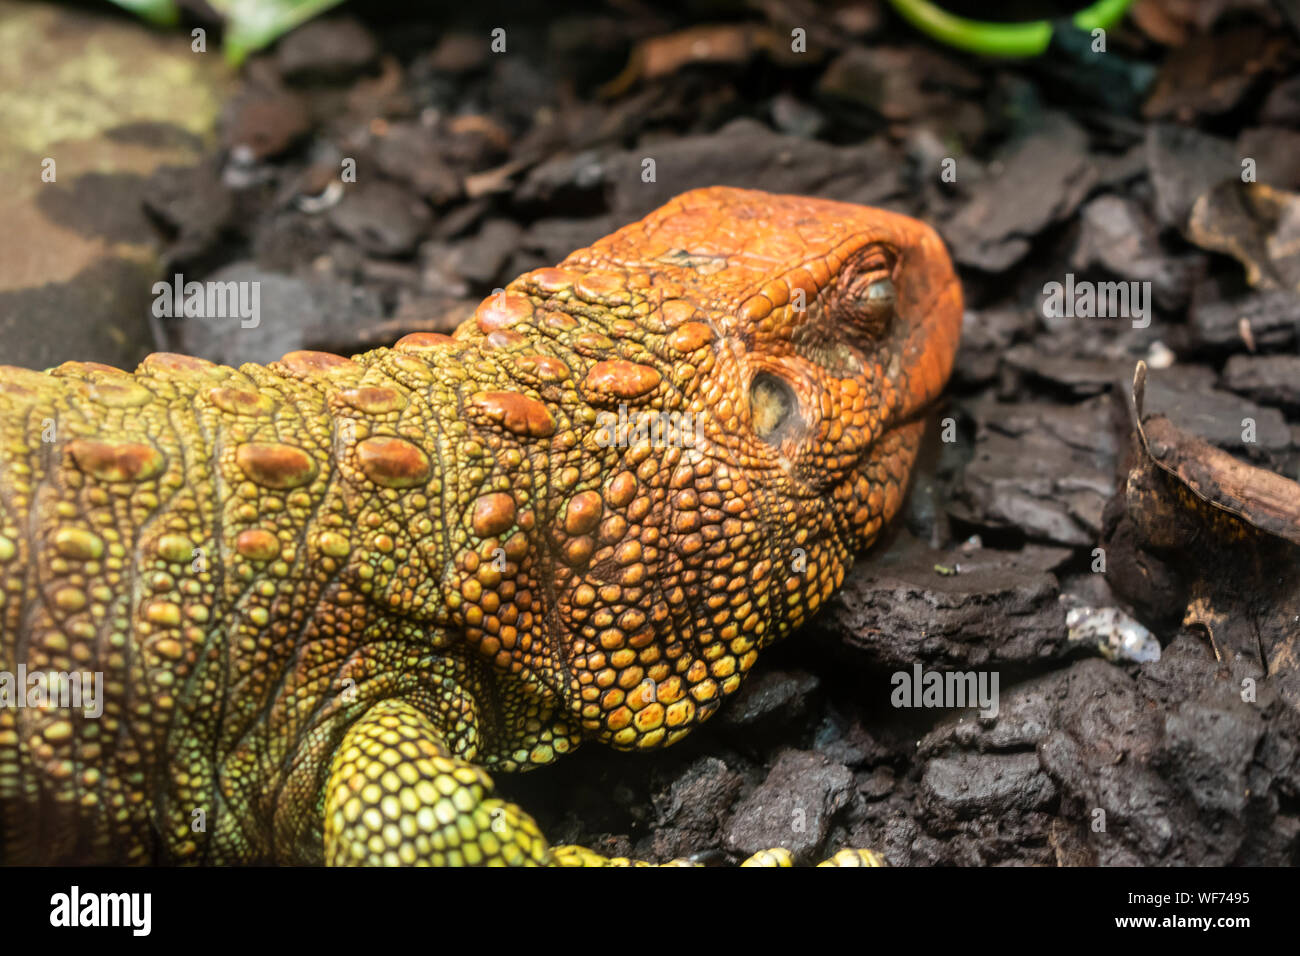 The northern caiman lizard (Dracaena guianensis) is a species of lizard found in northern South America. Stock Photo